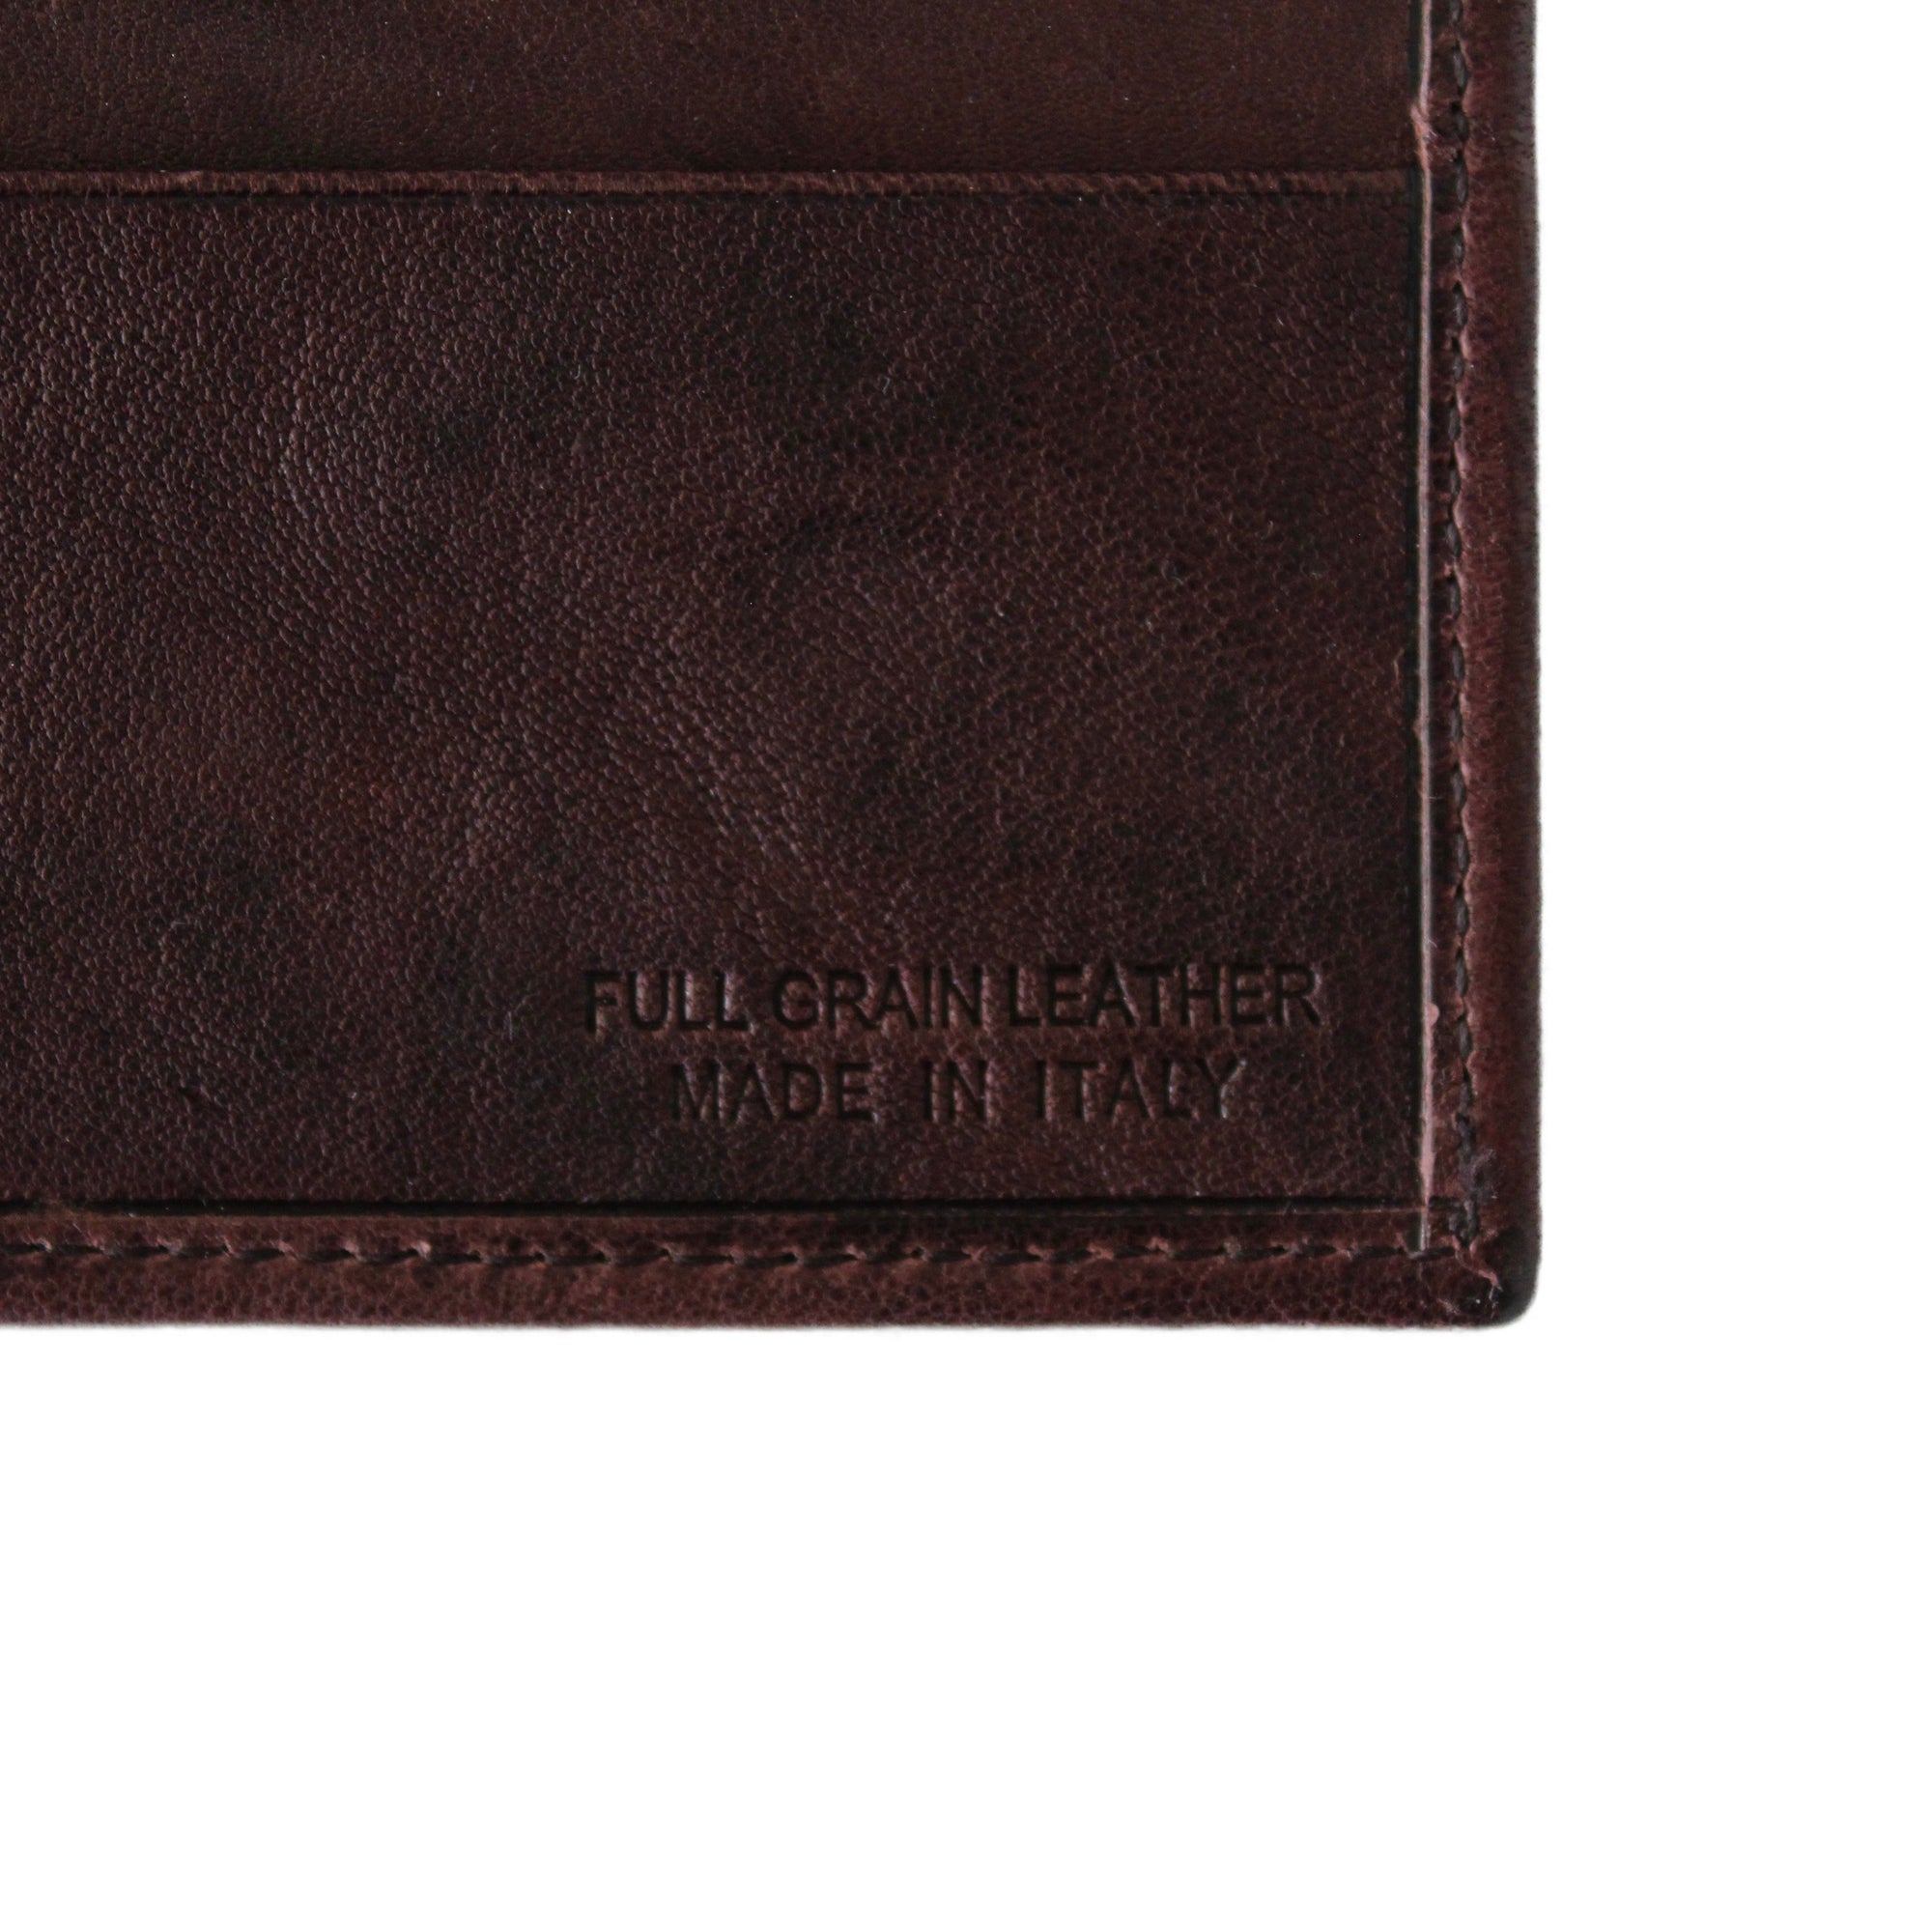 Full grain leather stamp, Timbro full grain leather